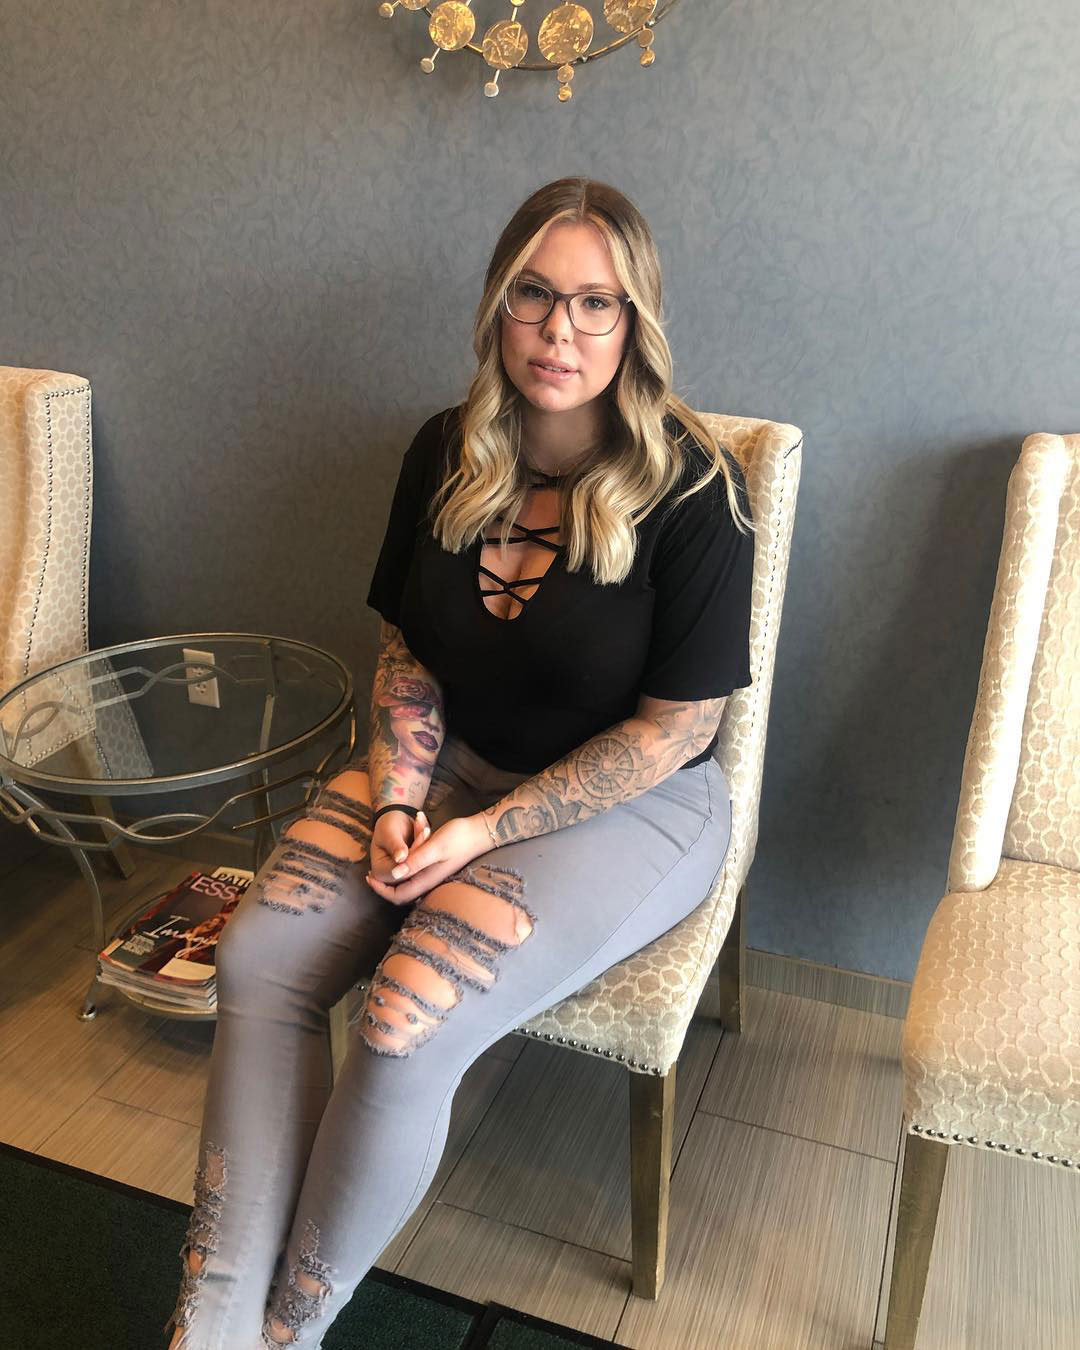 Couples Fucking On Beach Candid - Teen Mom 2's Kailyn Lowry: My Kids Walked in on Me Having Sex